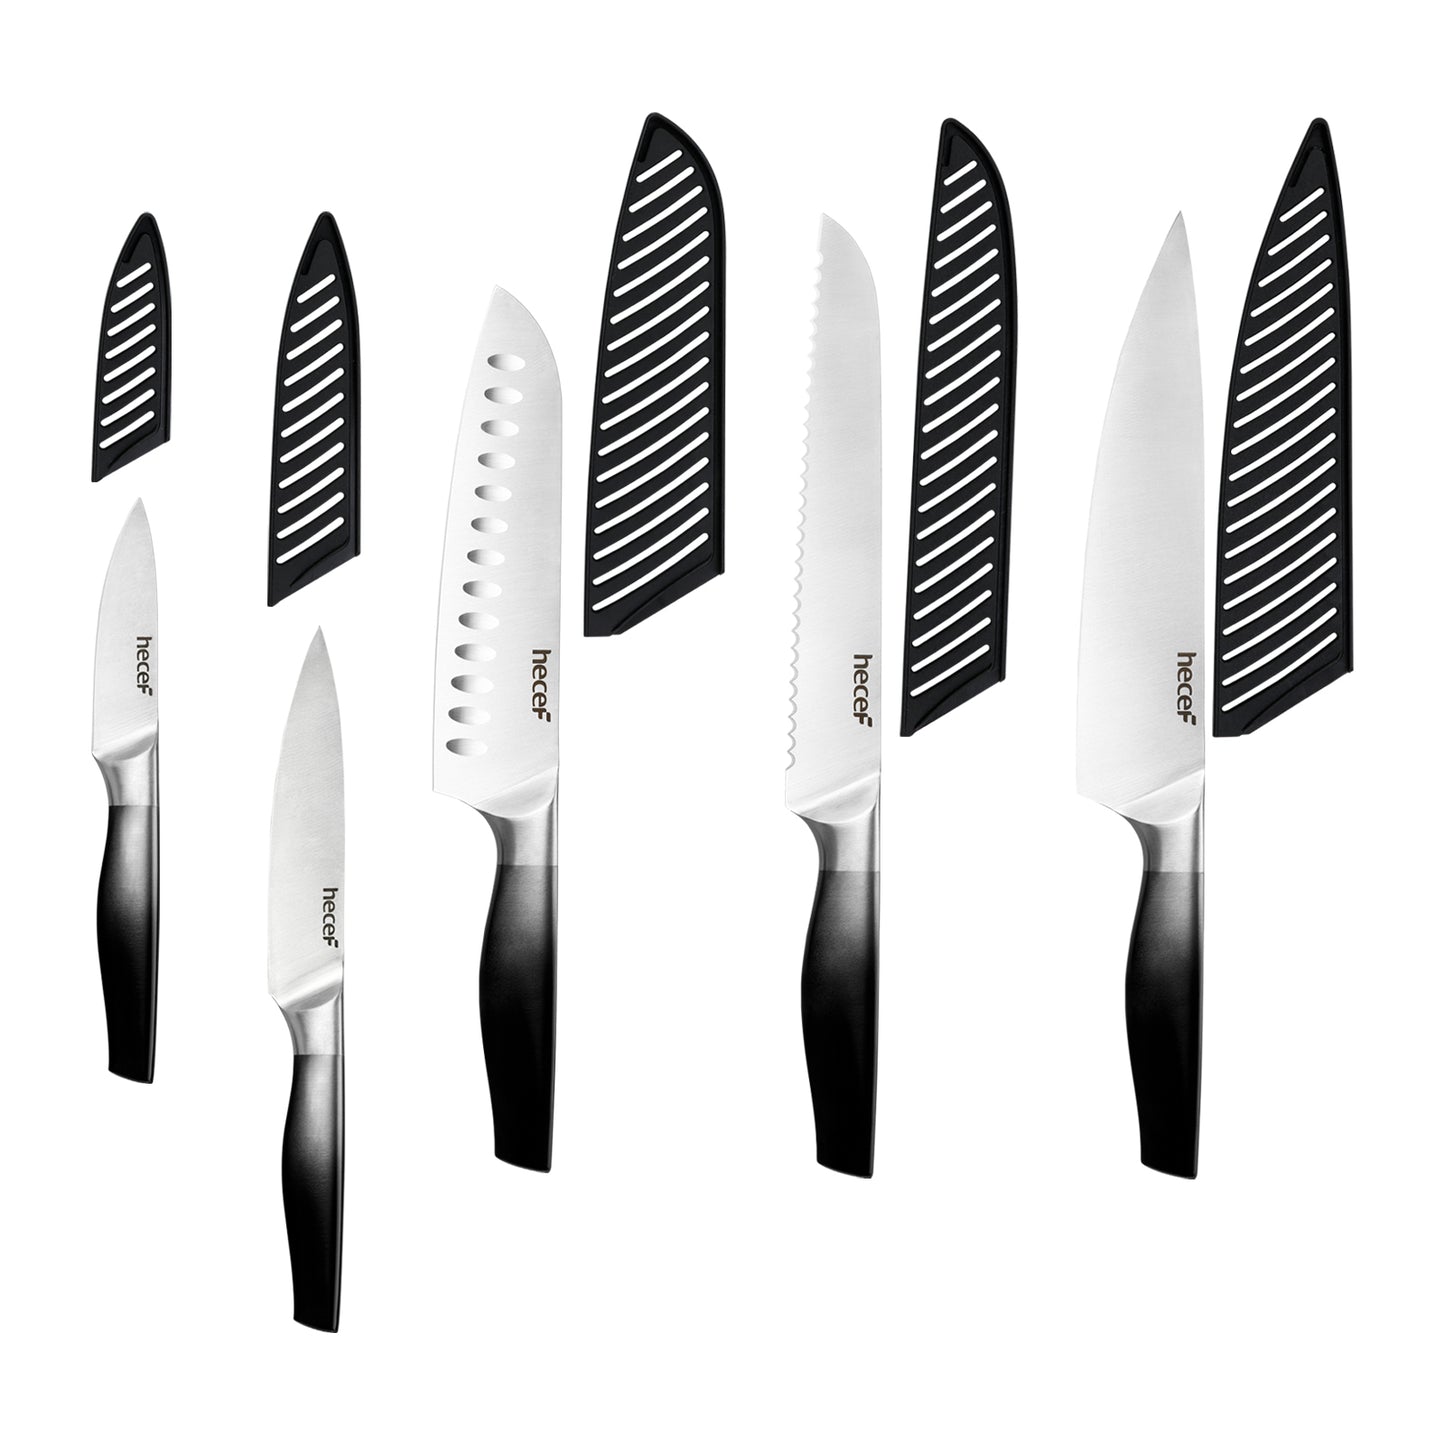 Black Gradient Kitchen Knives Set of 5 Chef's Knife Set with Satin Blade & Hollow Handle & Protective Covers Includes Cook, Santoku, Bread, All Purpose & Vegetable Knife - Hecef Kitchen